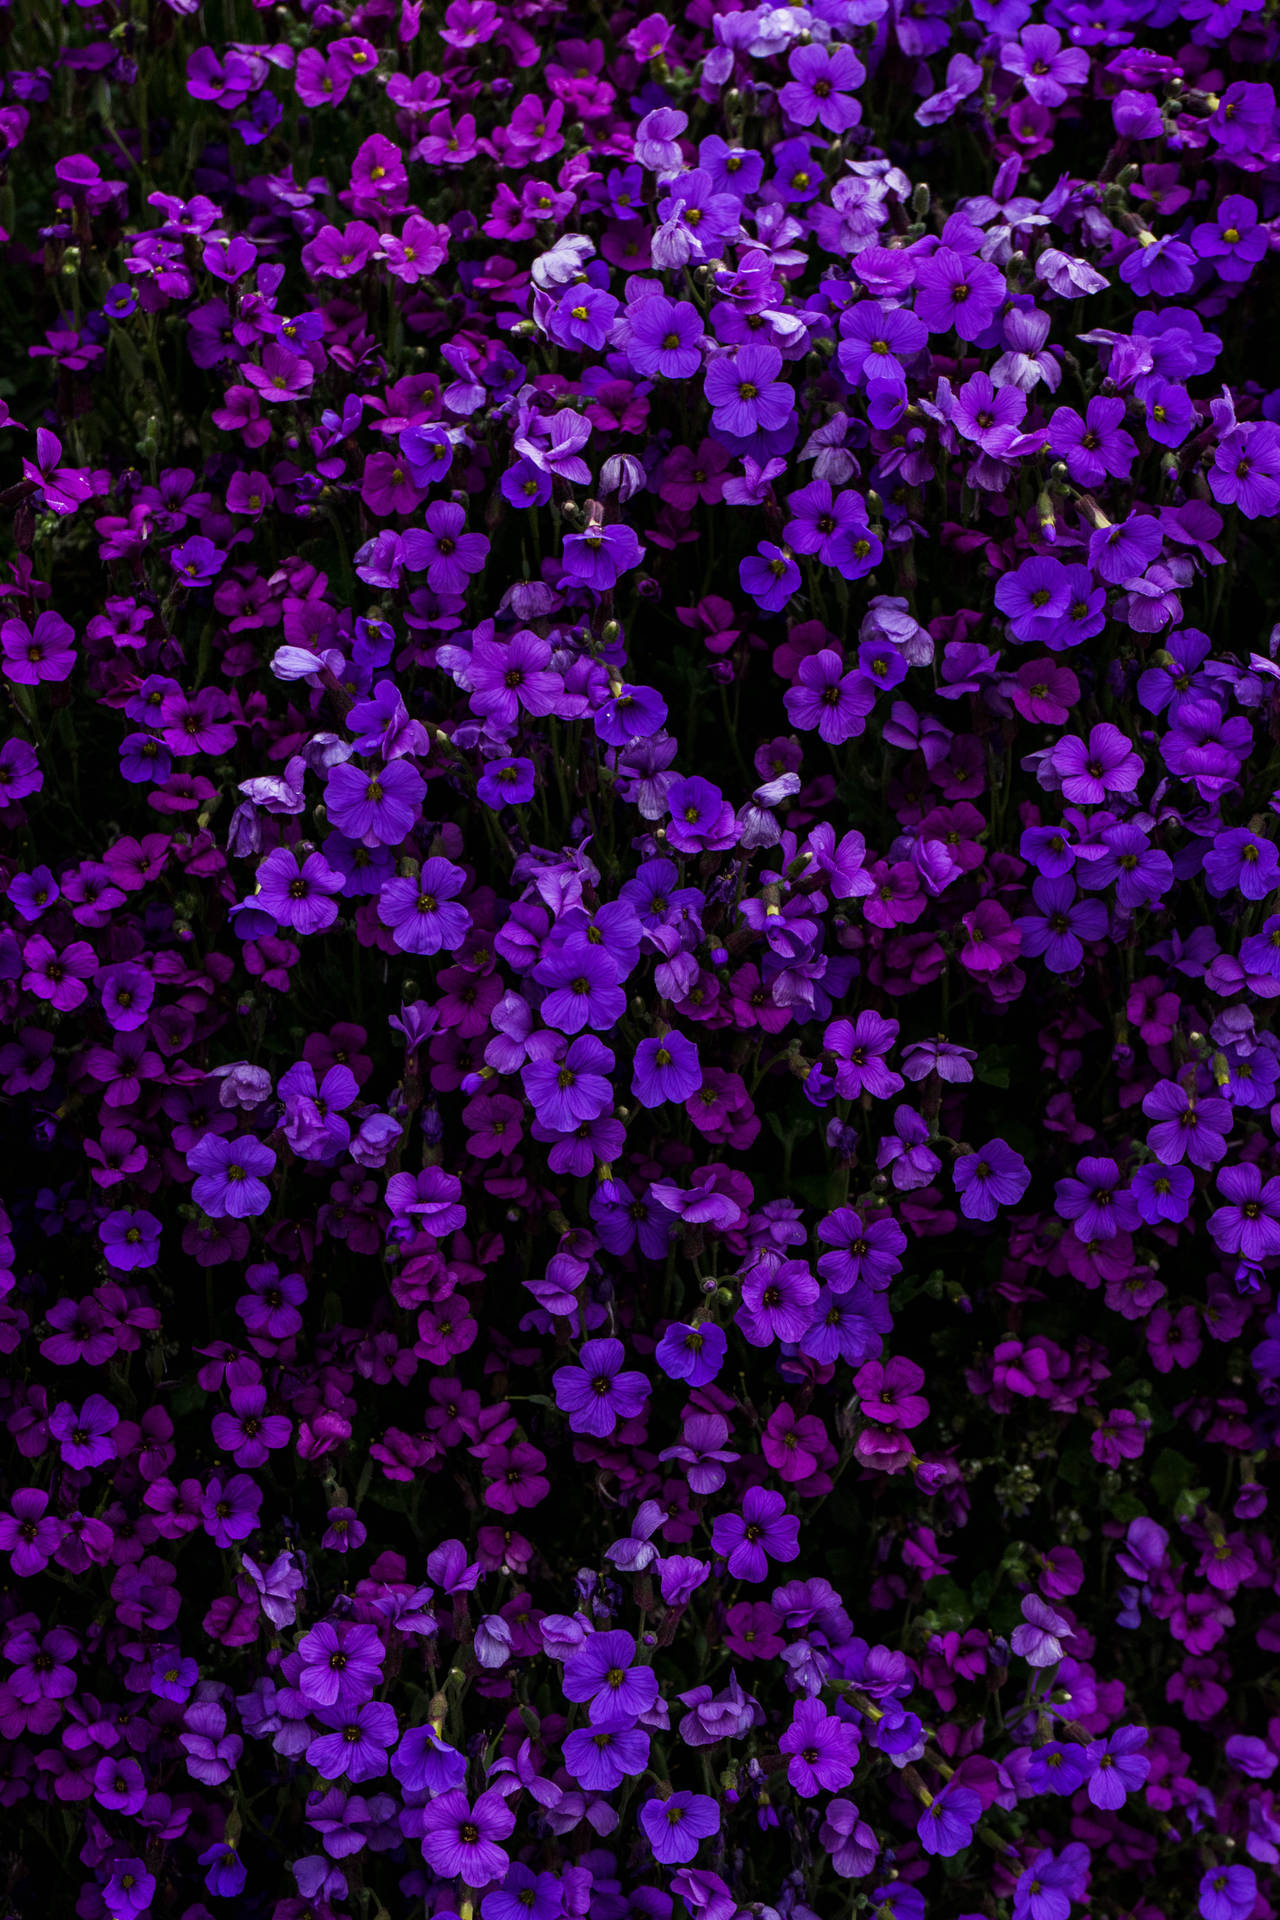 Experience the beauty of this aesthetic purple flower. Wallpaper